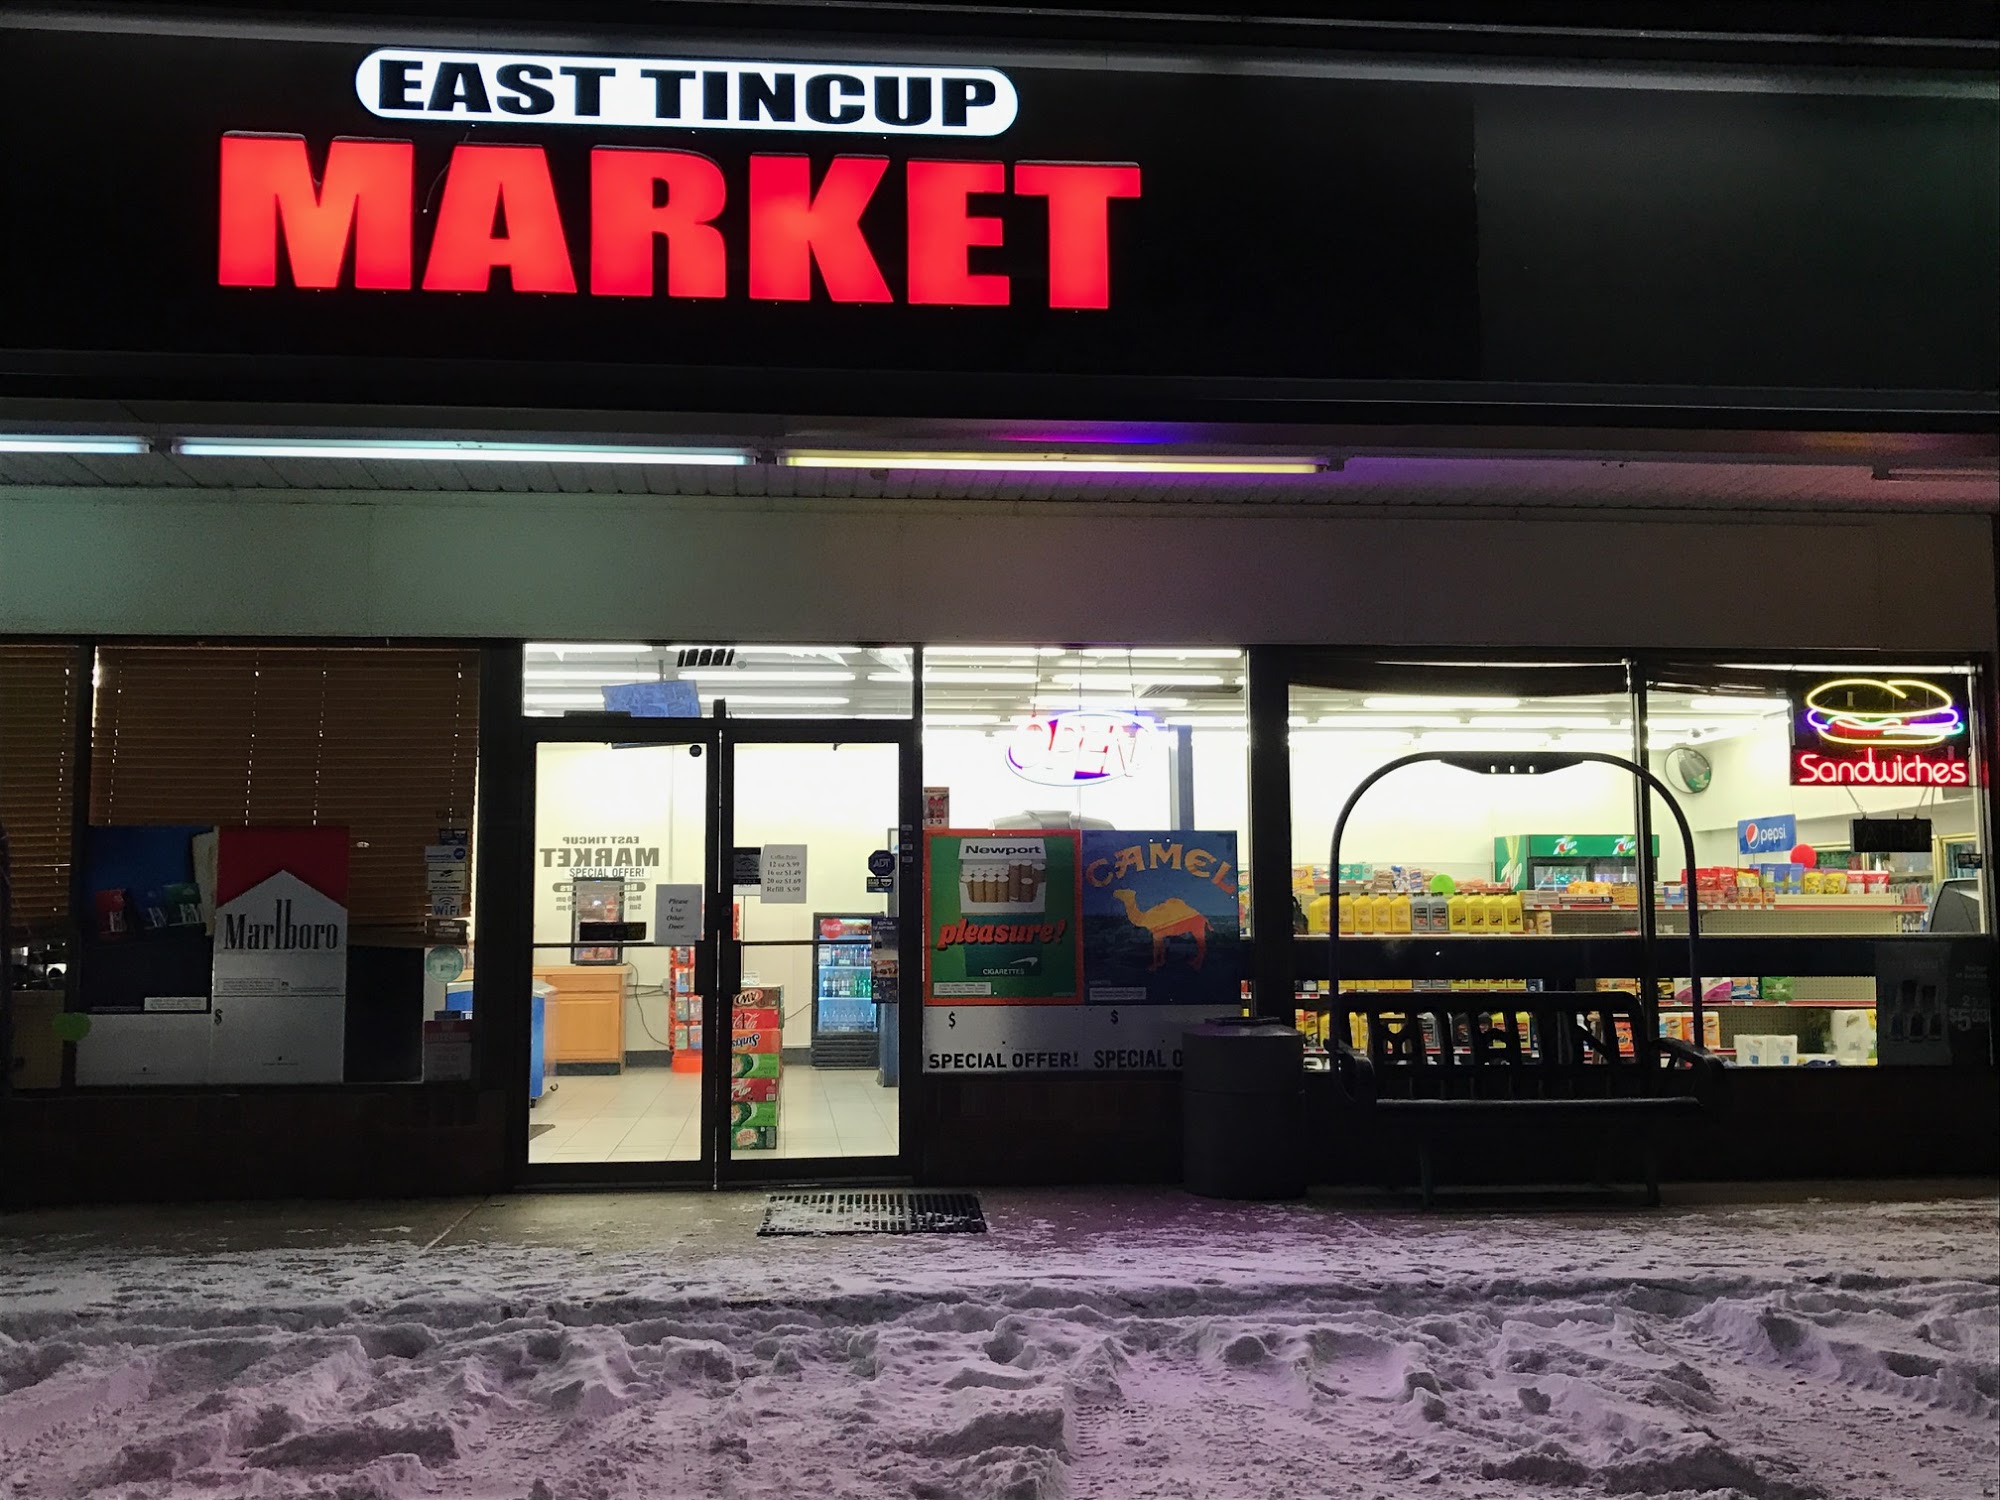 EAST TIN CUP MARKET